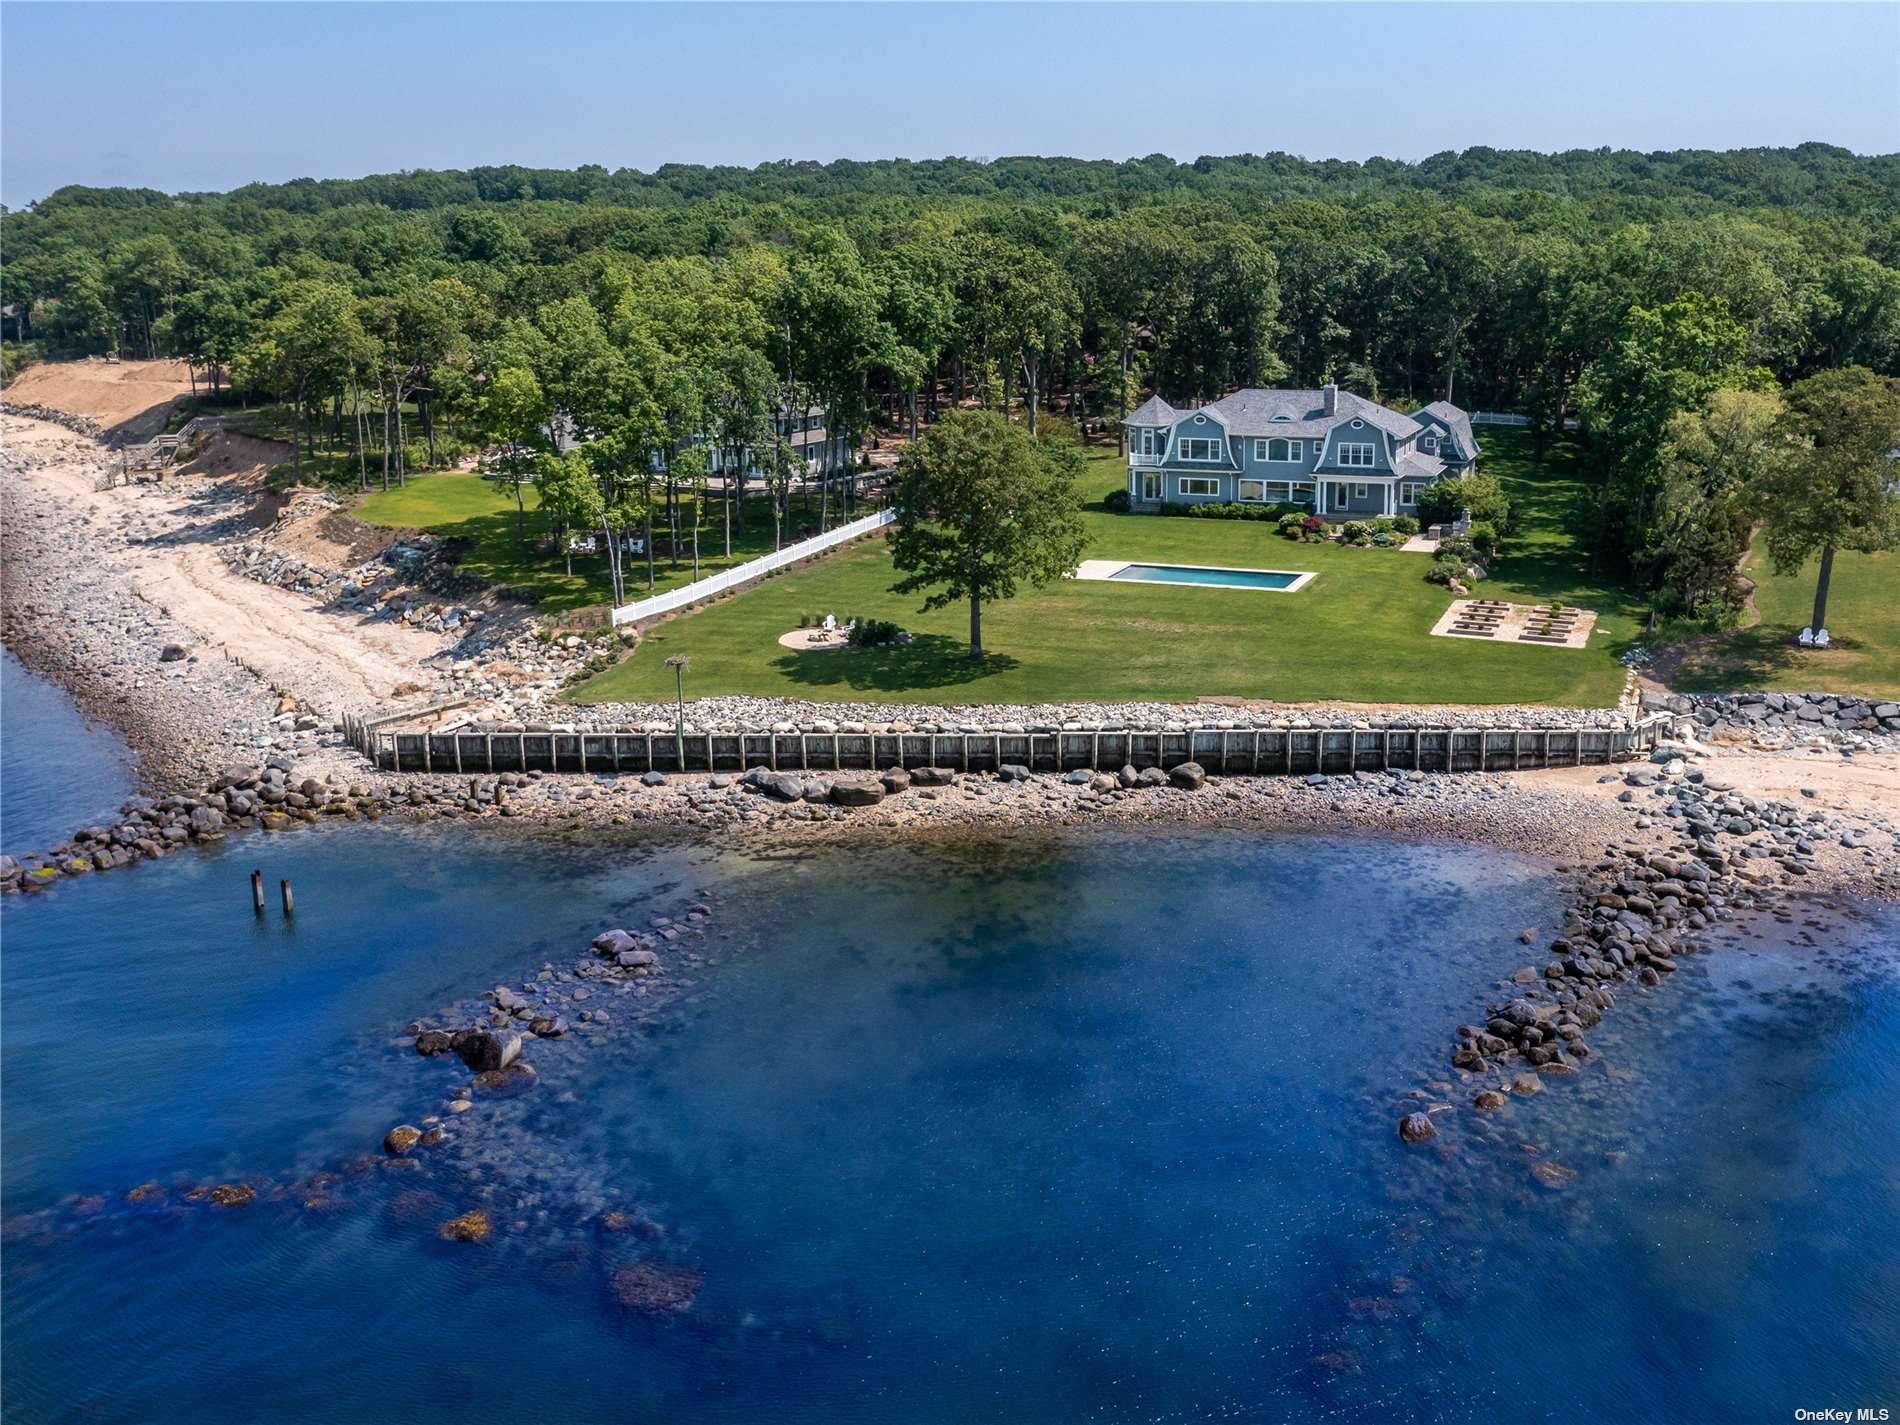 Welcome To This Stunning TRUE Waterfront Estate On LI's Gold Coast With Panoramic Unobstructed Waterviews.